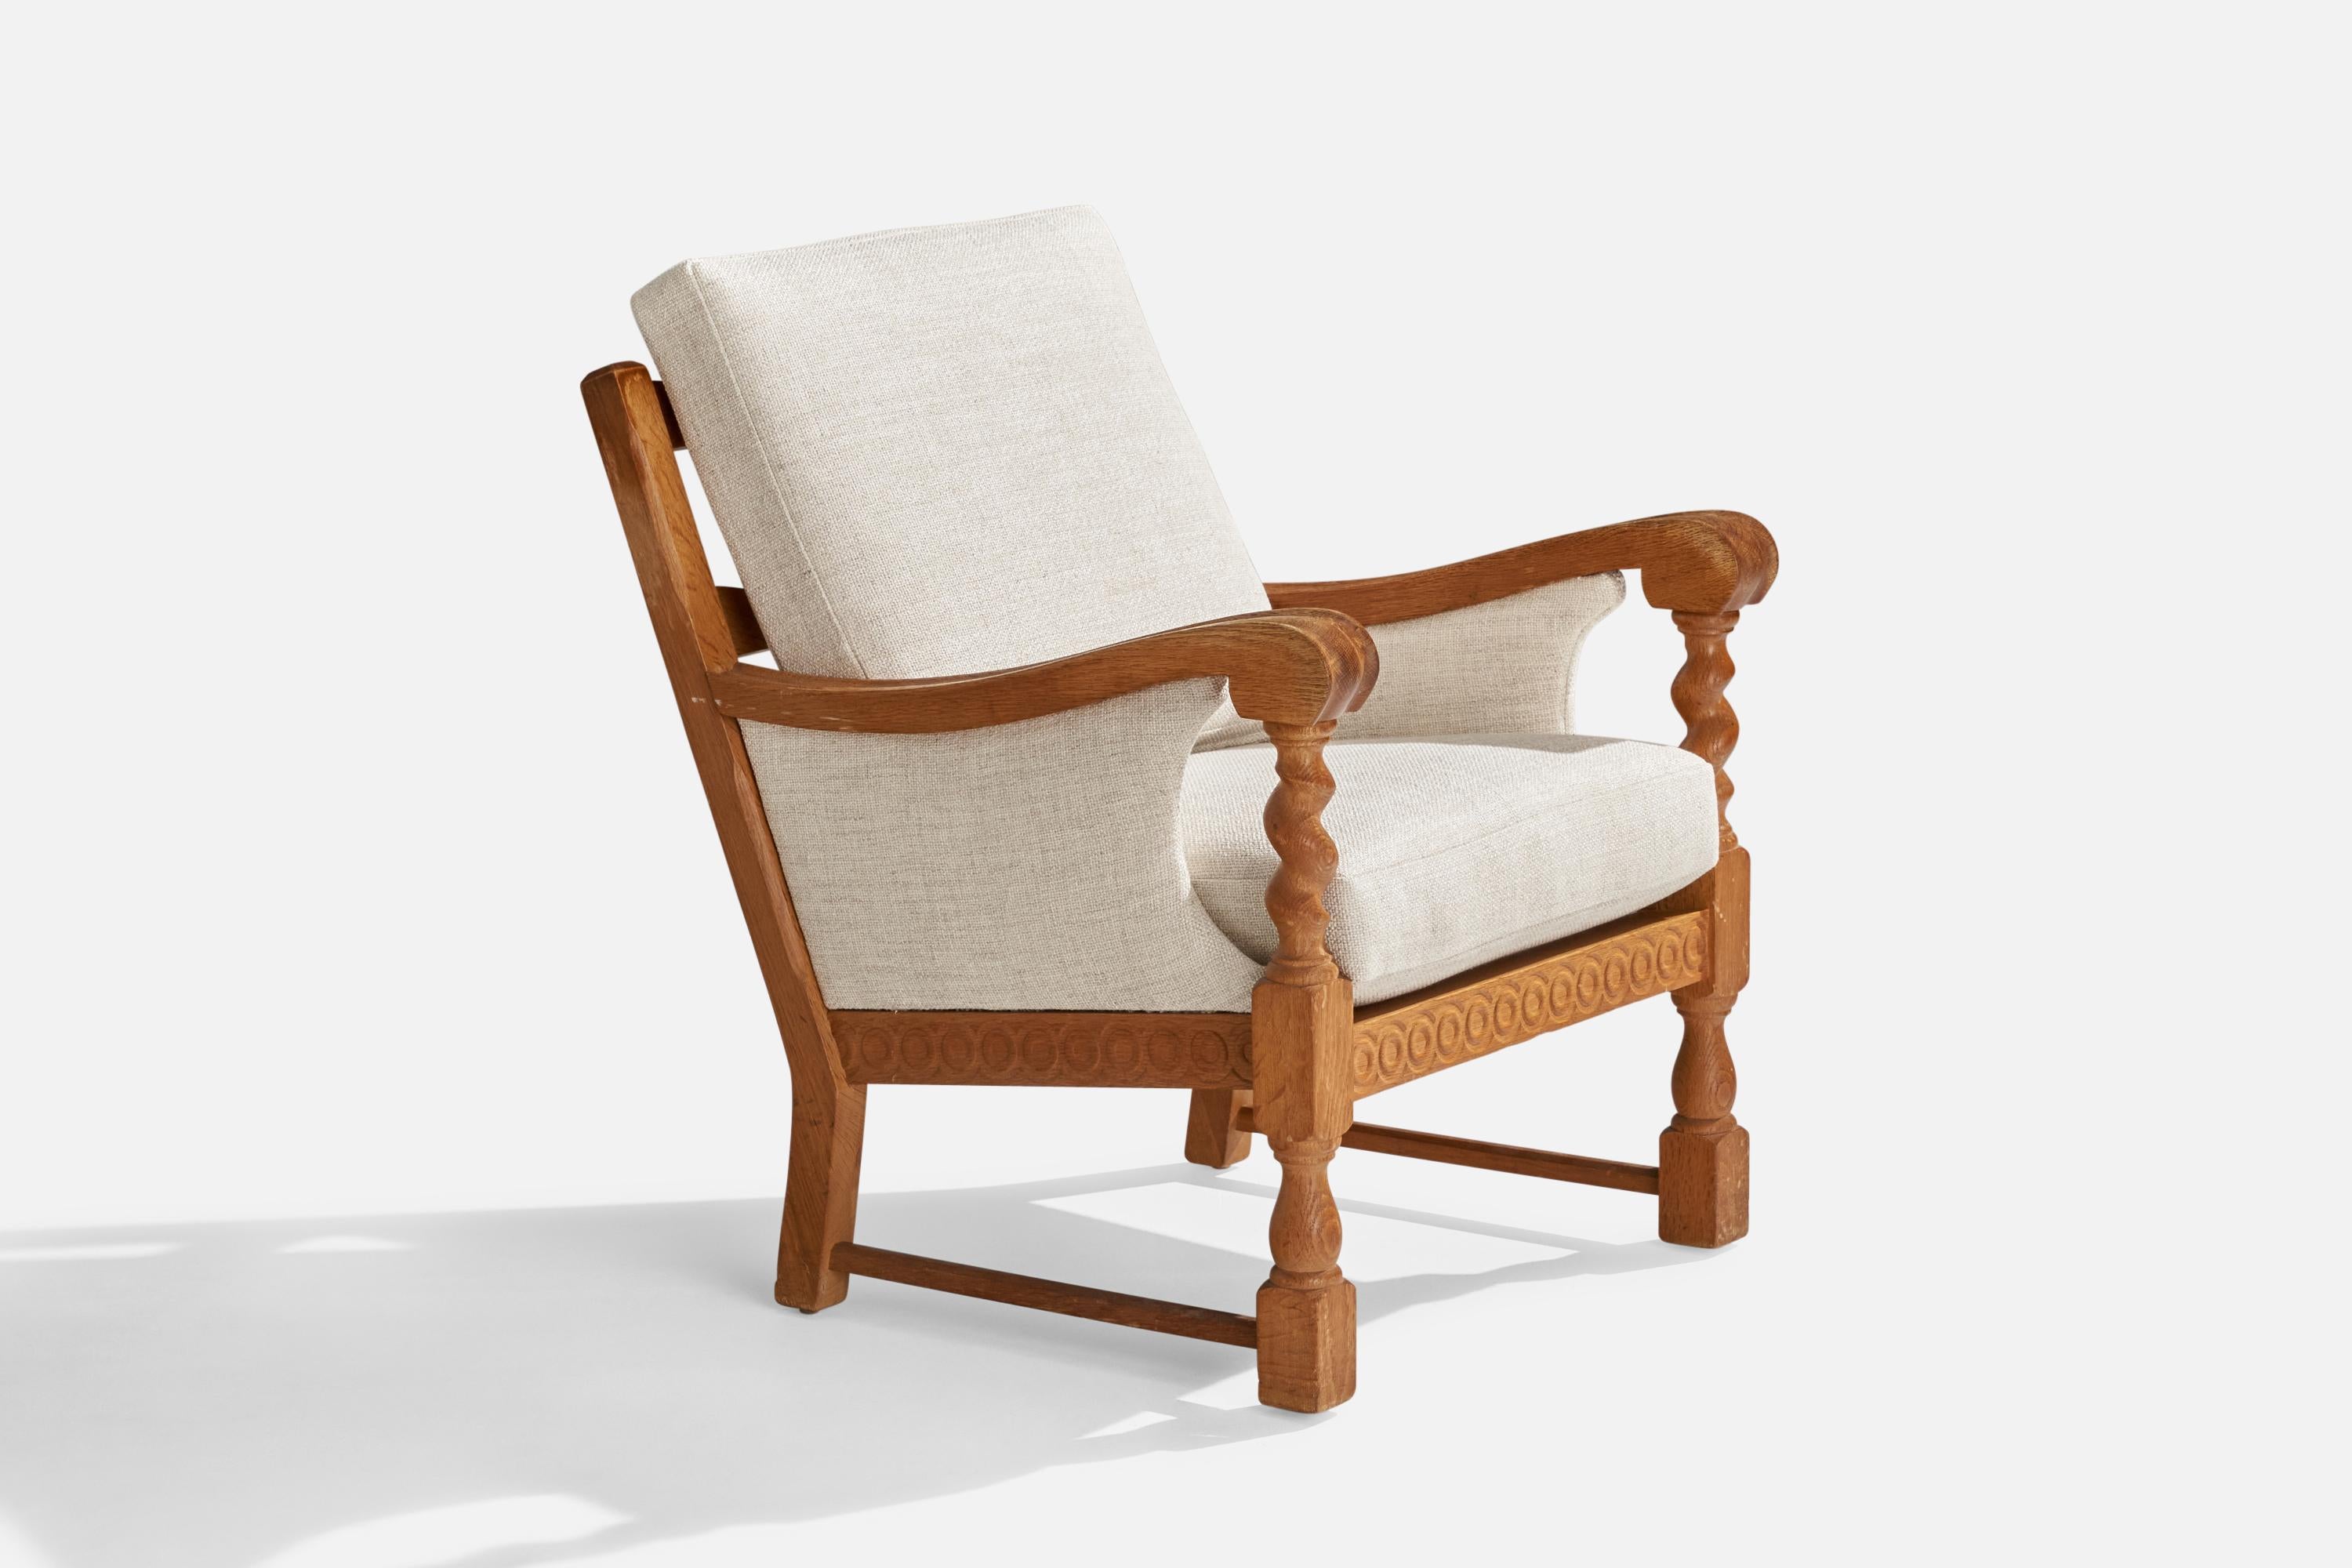 An oak and white fabric lounge chair designed and produced in Denmark, 1960s.

Seat height: 17.25”